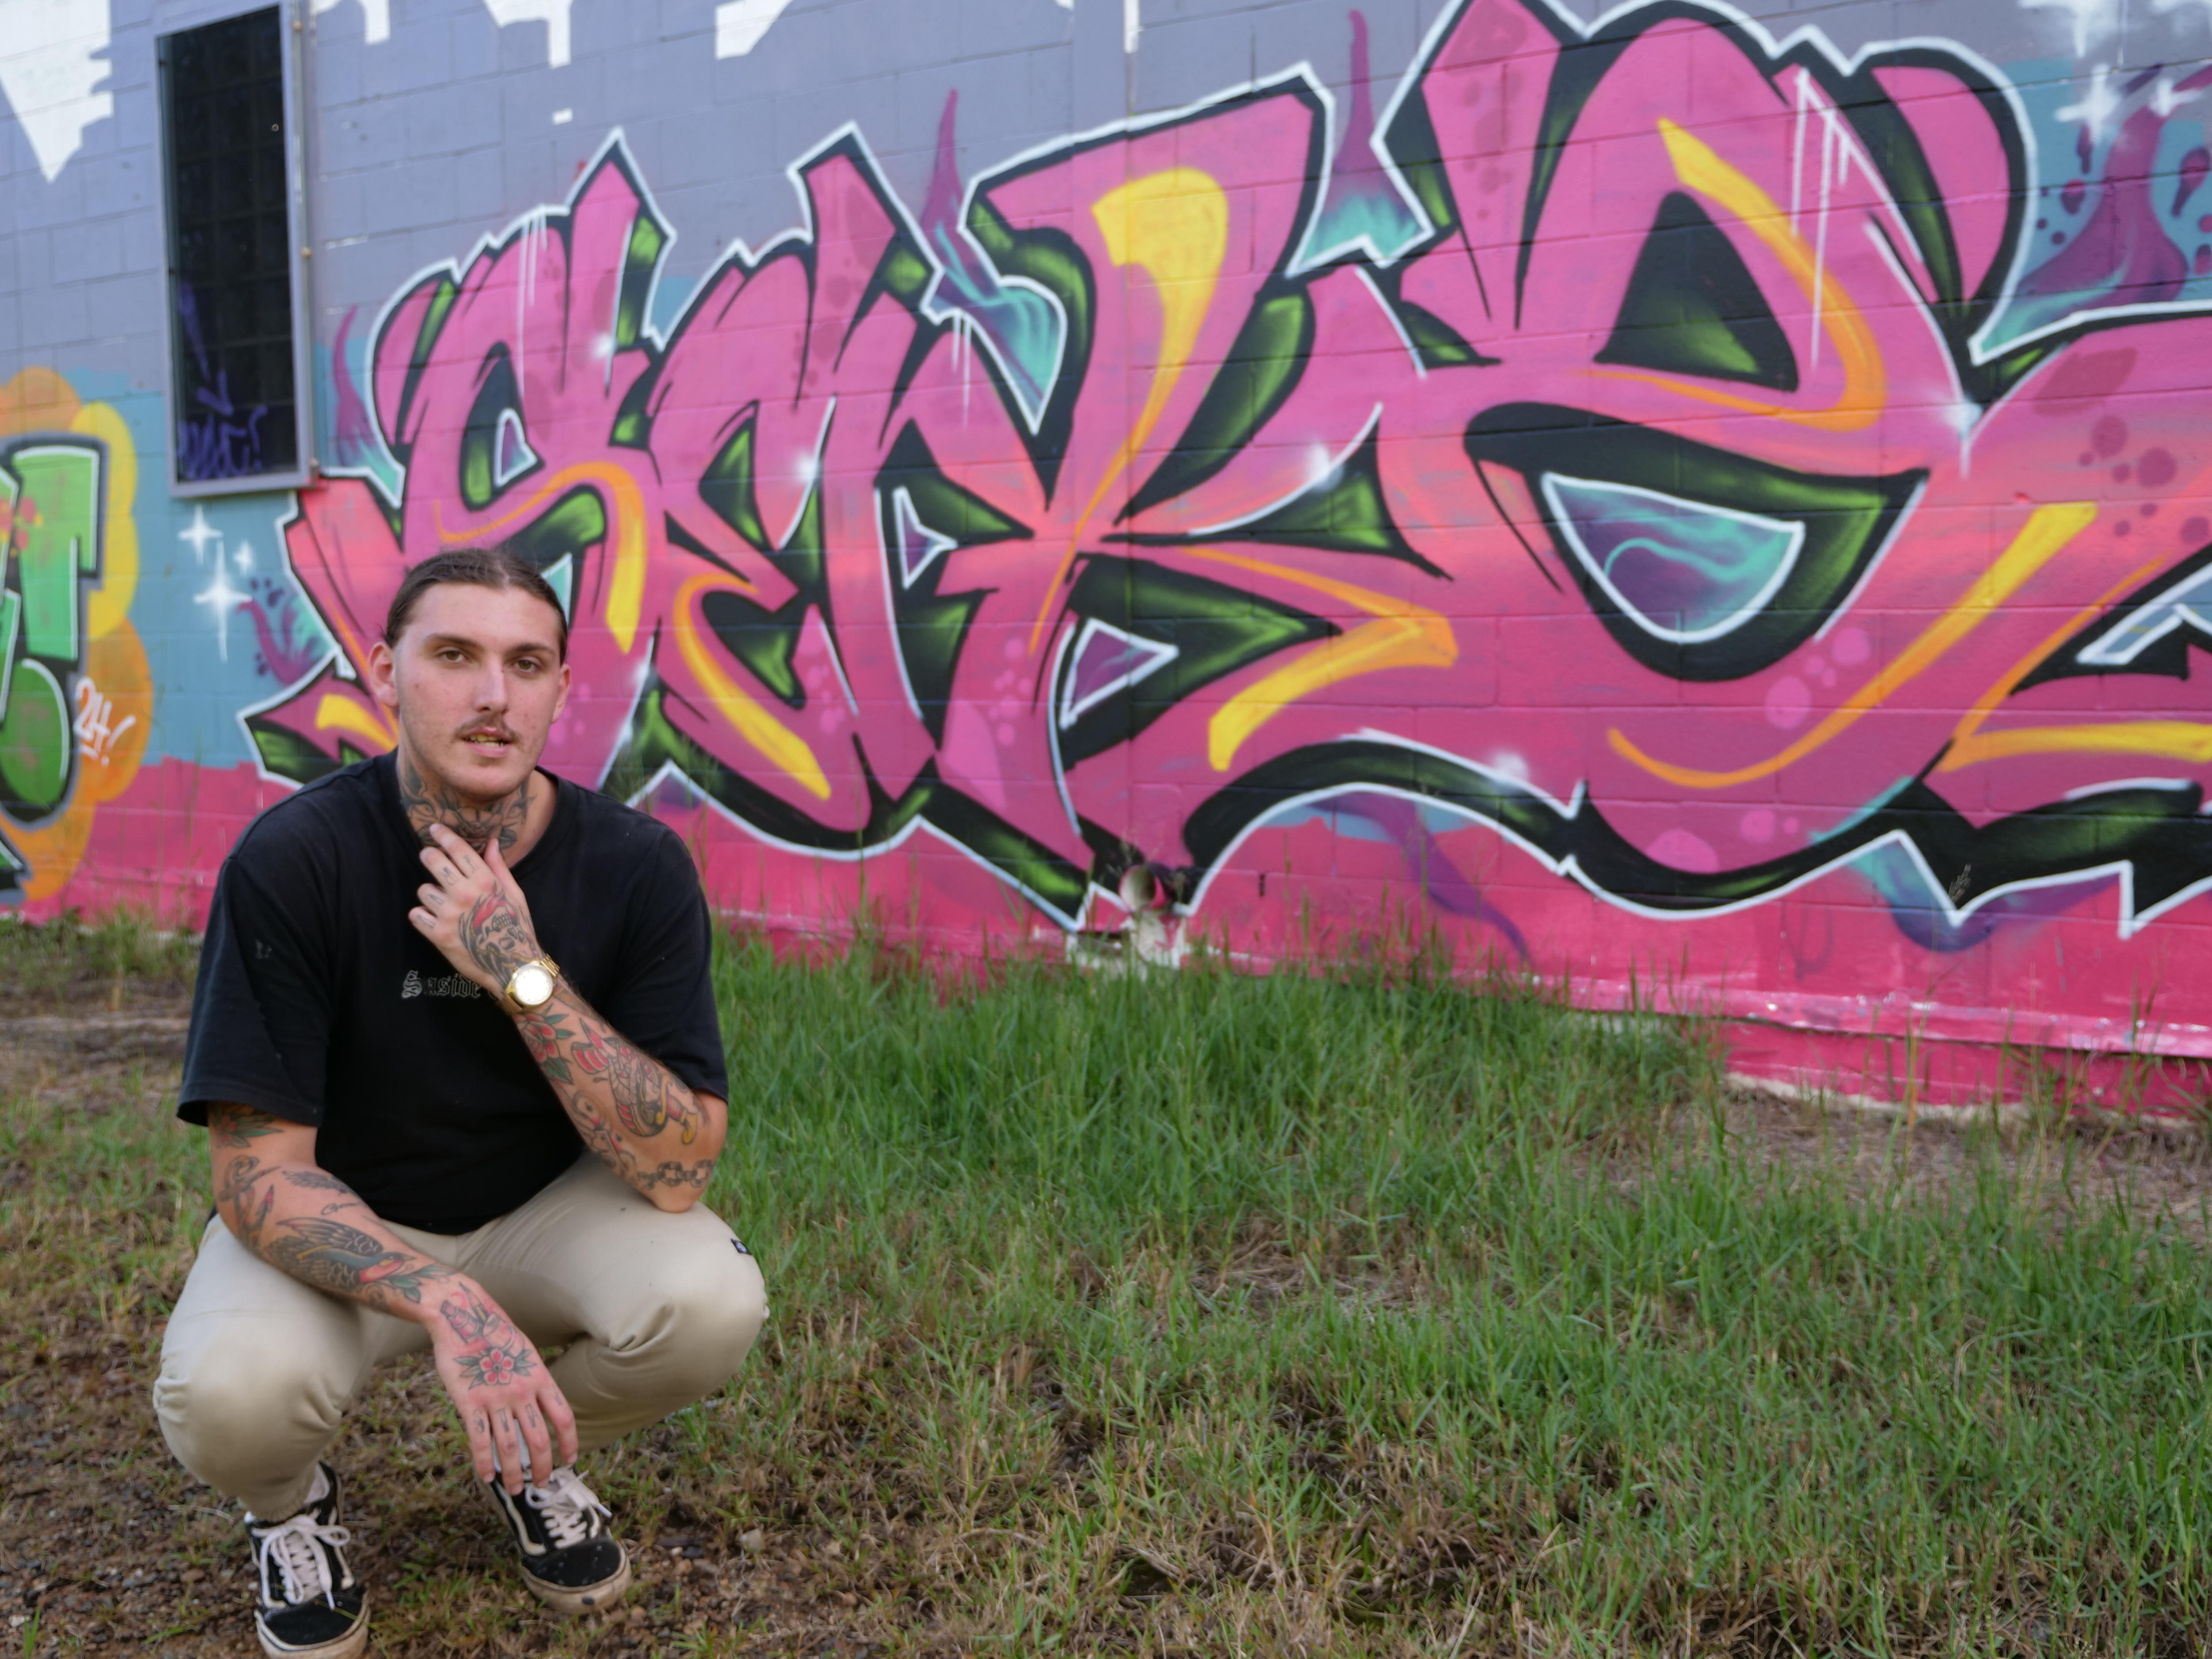 A young man with tattoos and long hair pulled back, crouched on grass before a large pink and yellow graffiti word on a wall 